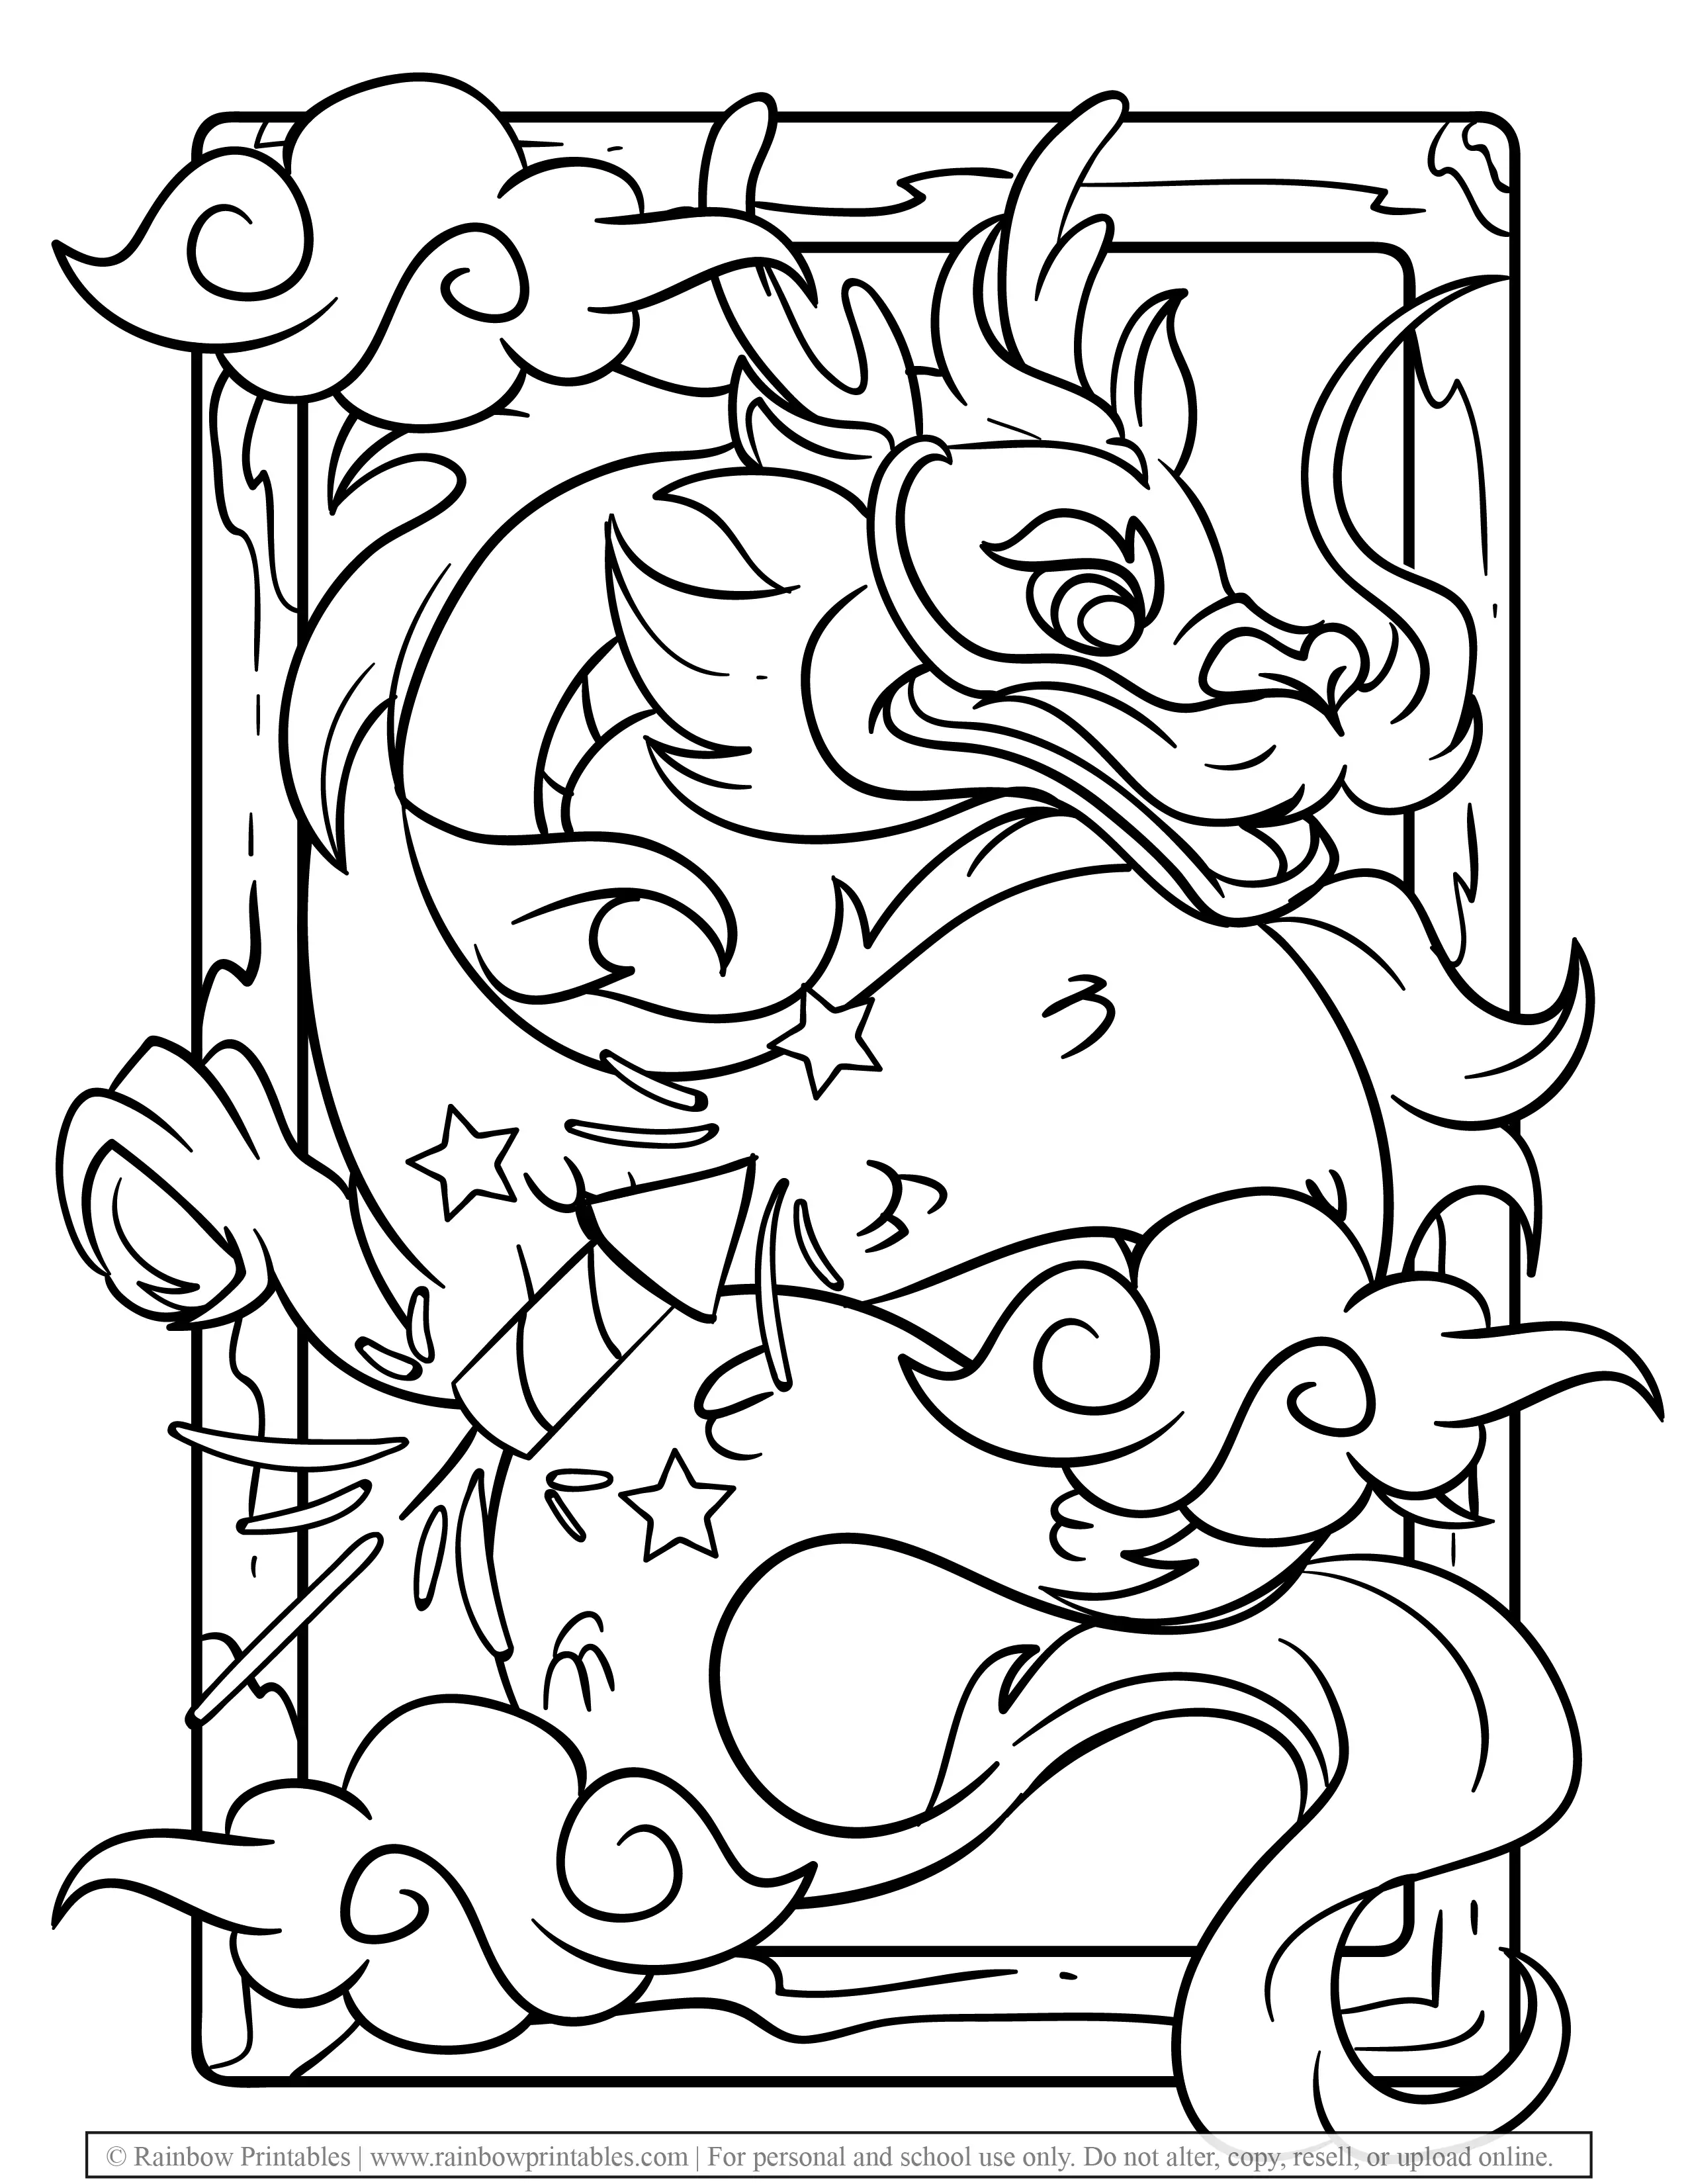 Free Coloring Pages for Kids Drawing Activities Line Art Illustration CHINESE CUTE SMPLE DRAGON FIRECRACKER ASIAN New Years